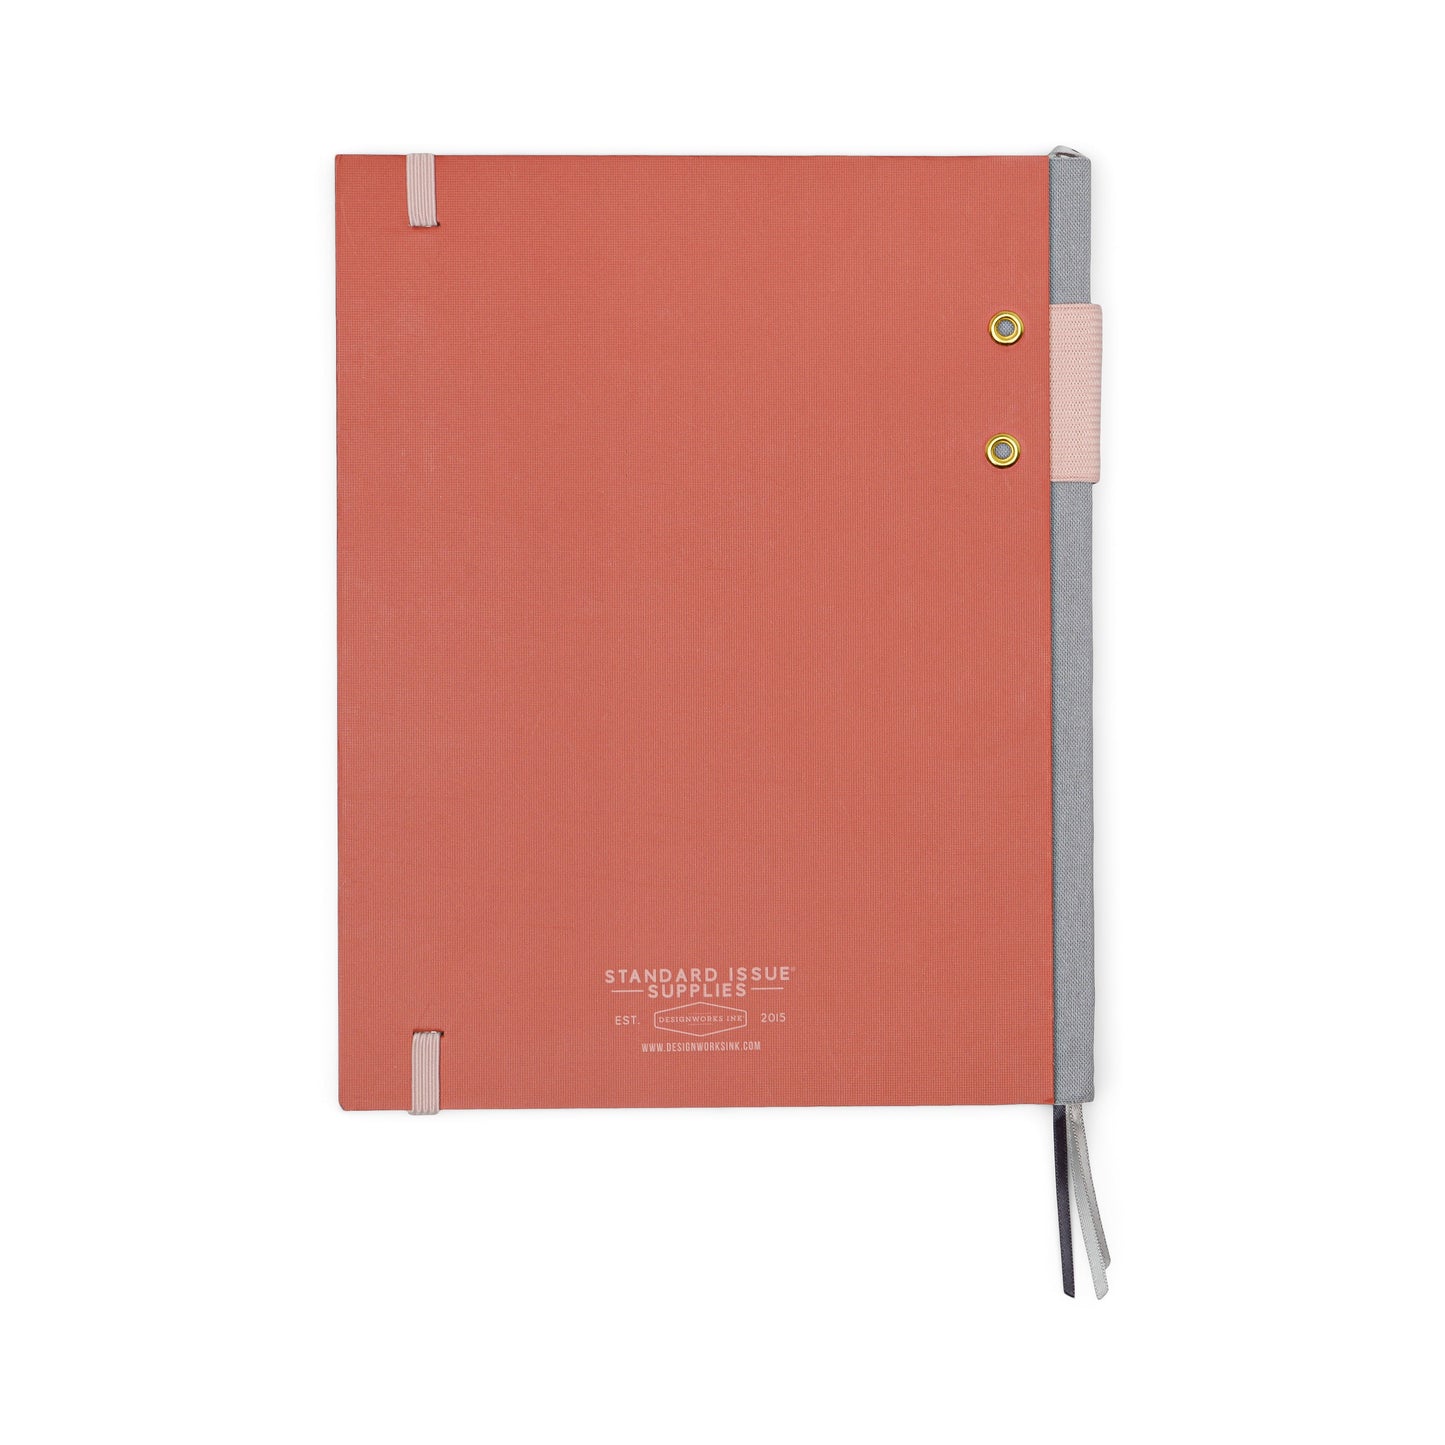 Standard Issue Planner Notebook No. 03 - Rosewood + Blush